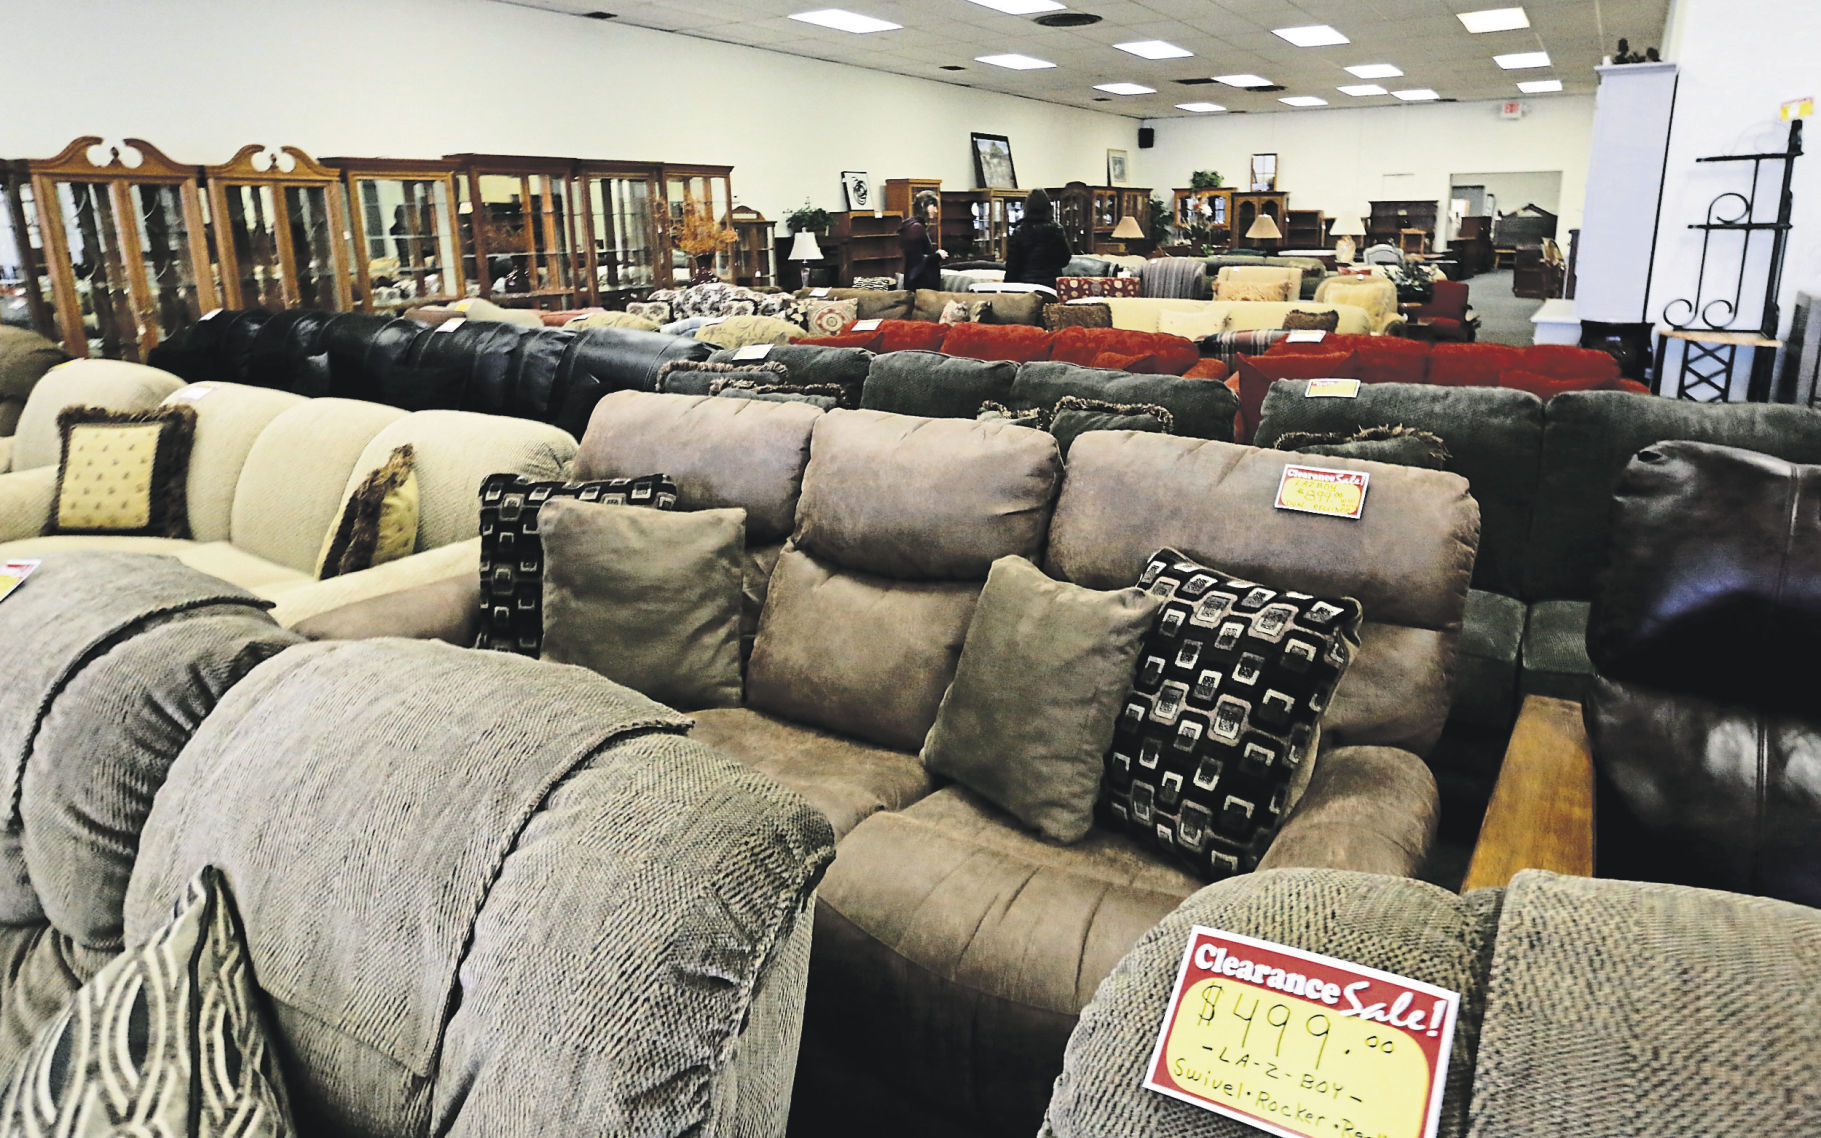 Affordable Furniture in Dubuque.  PHOTO CREDIT: EILEEN MESLAR